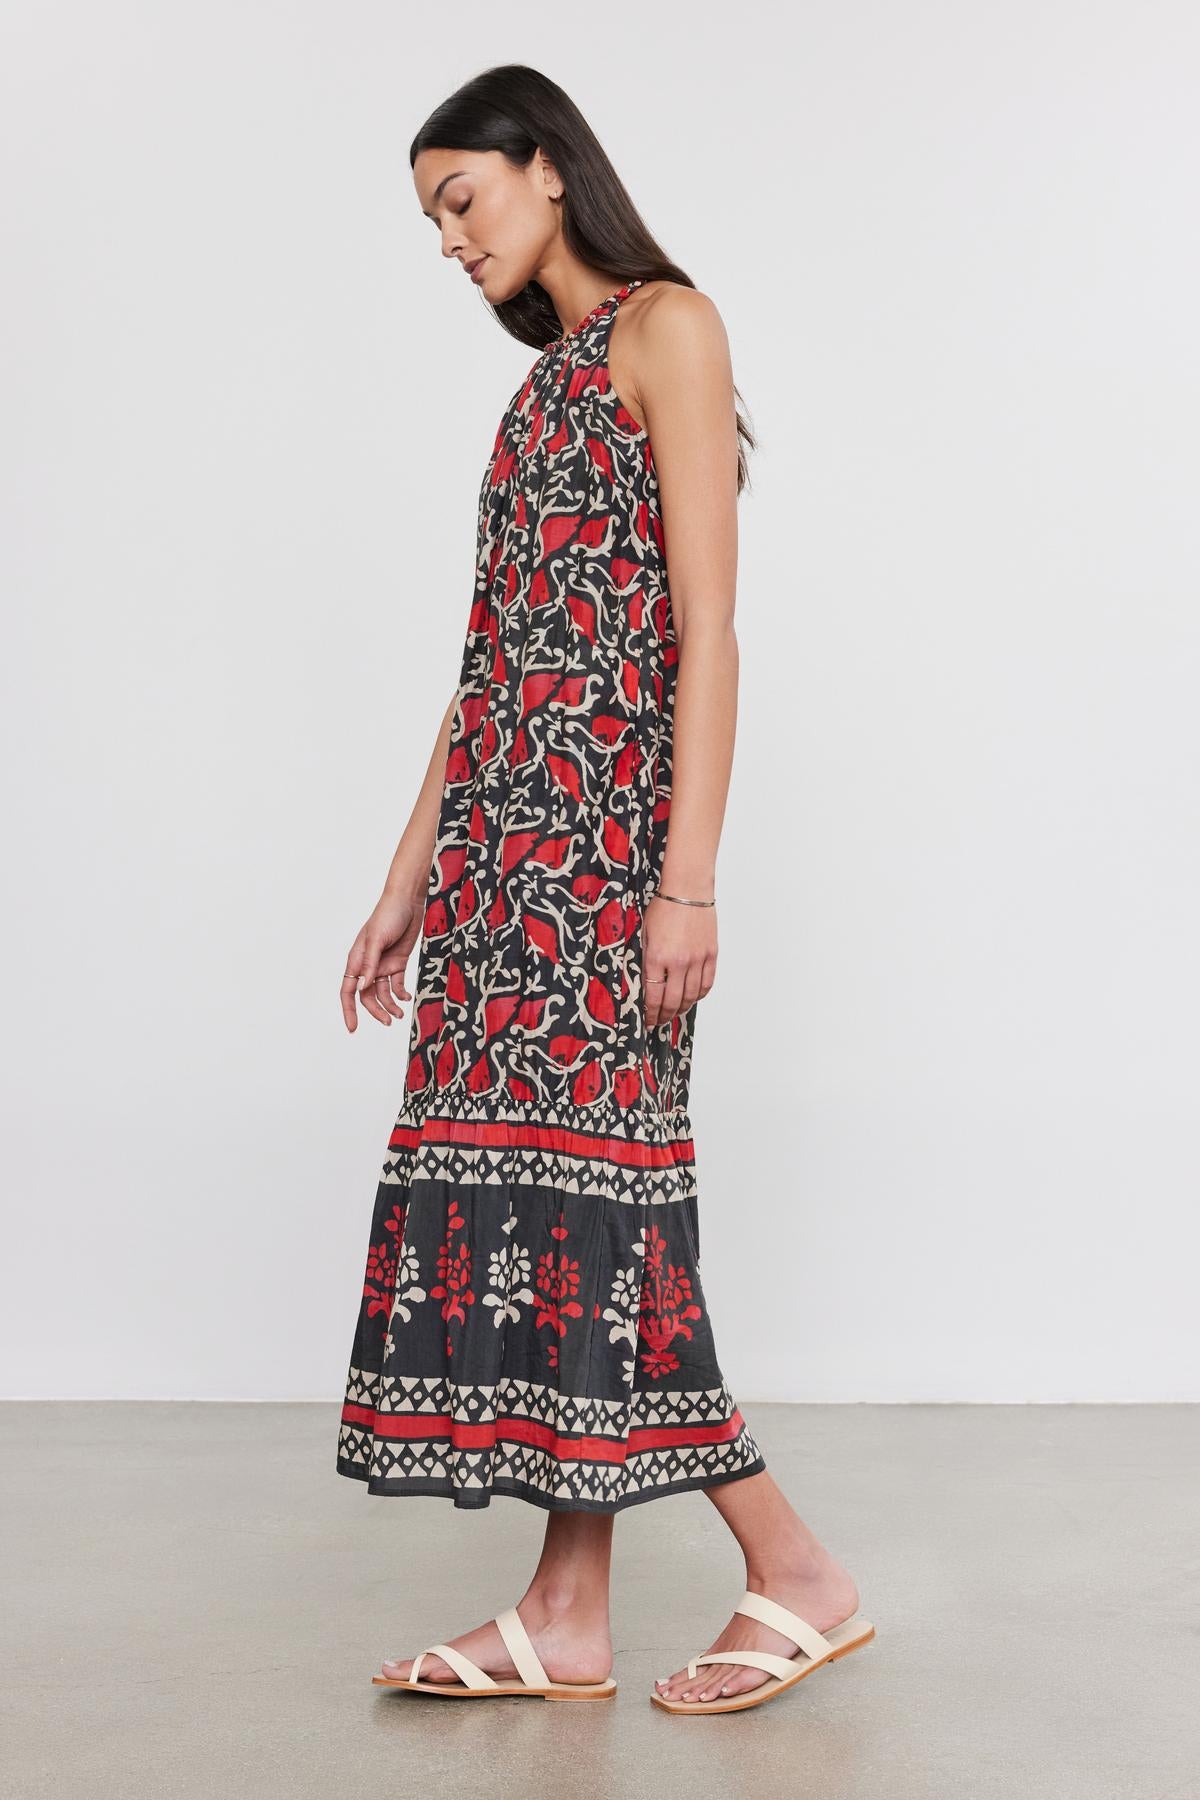   A woman wearing a sleeveless, ankle-length GHITA DRESS by Velvet by Graham & Spencer with a red, black, and white ethnic print, paired with white sandals, stands looking down. 